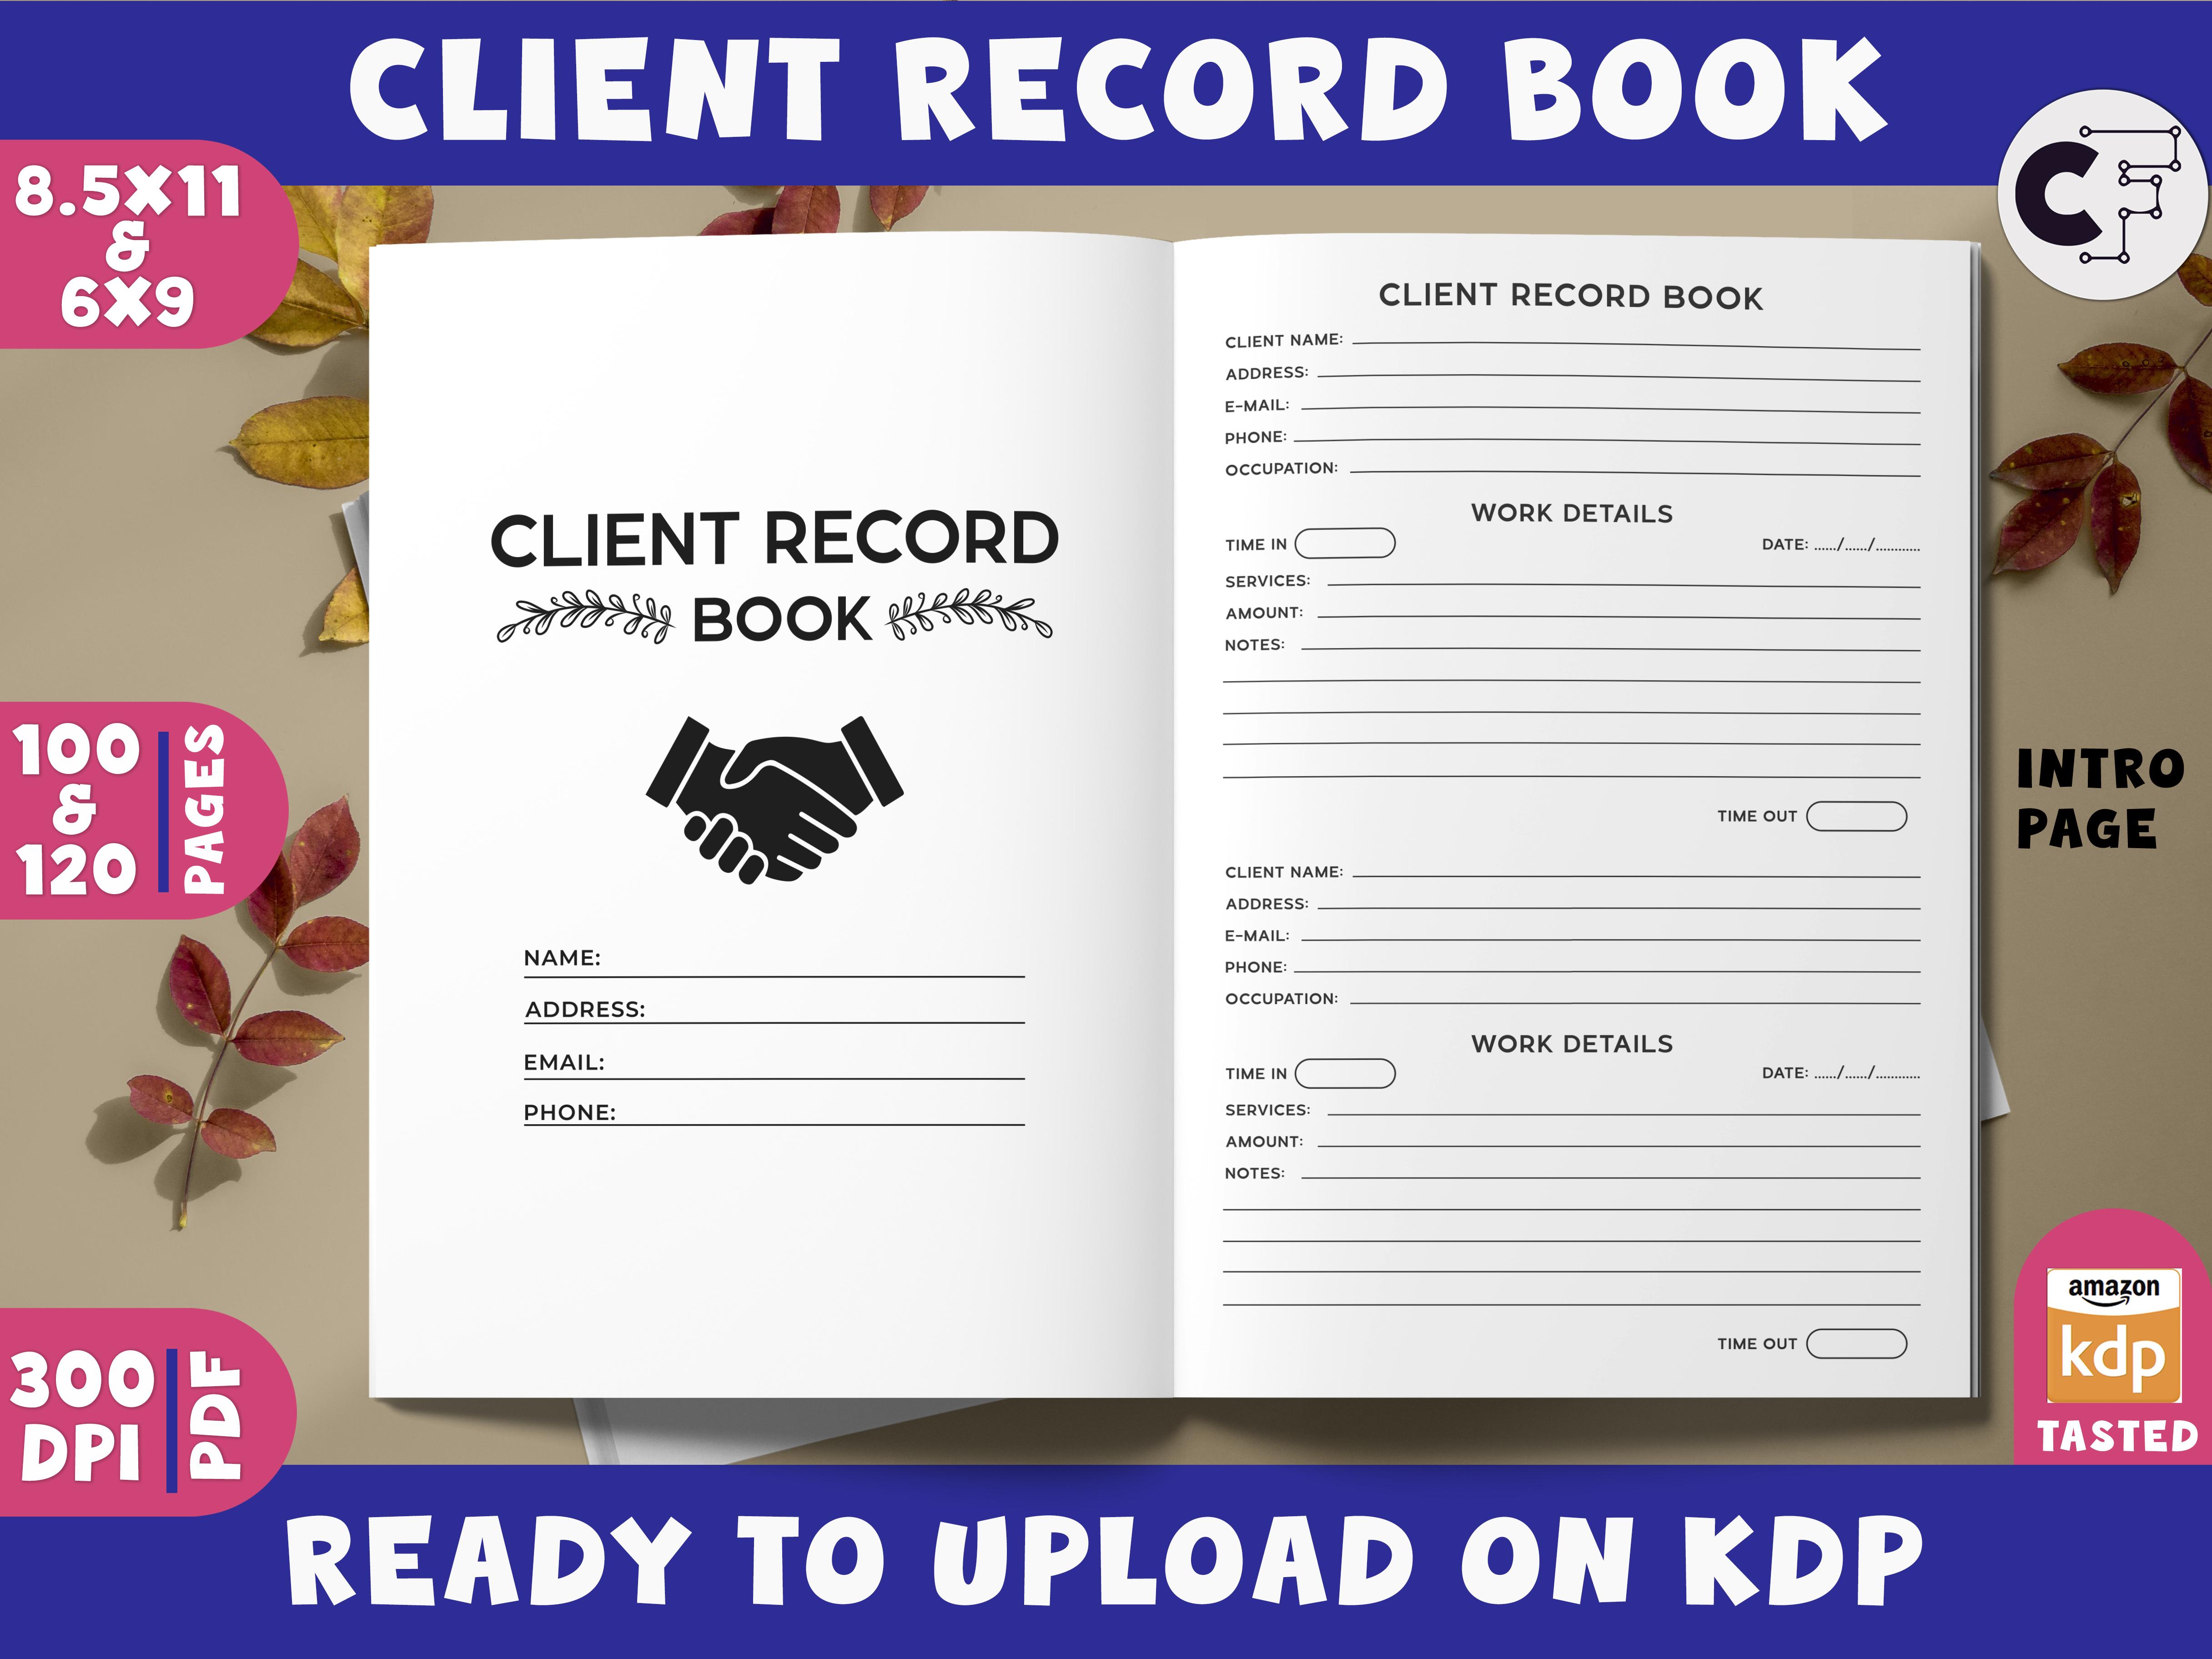 Client Record Book for KDP Interior